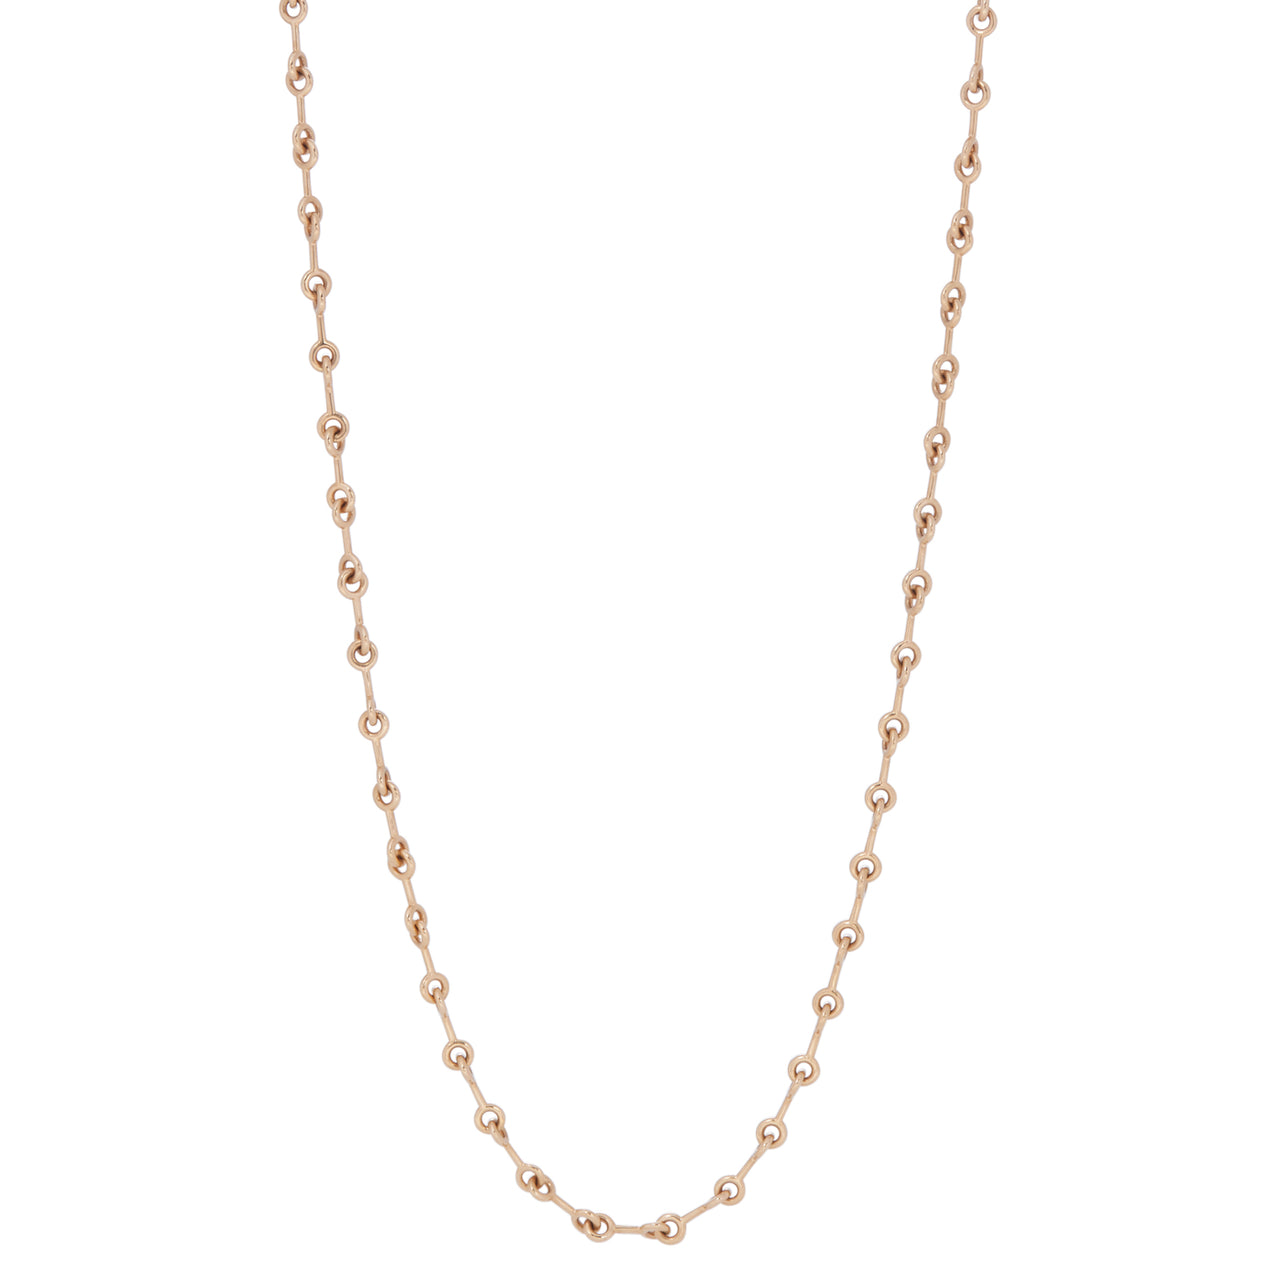 Allongee Chain Necklace